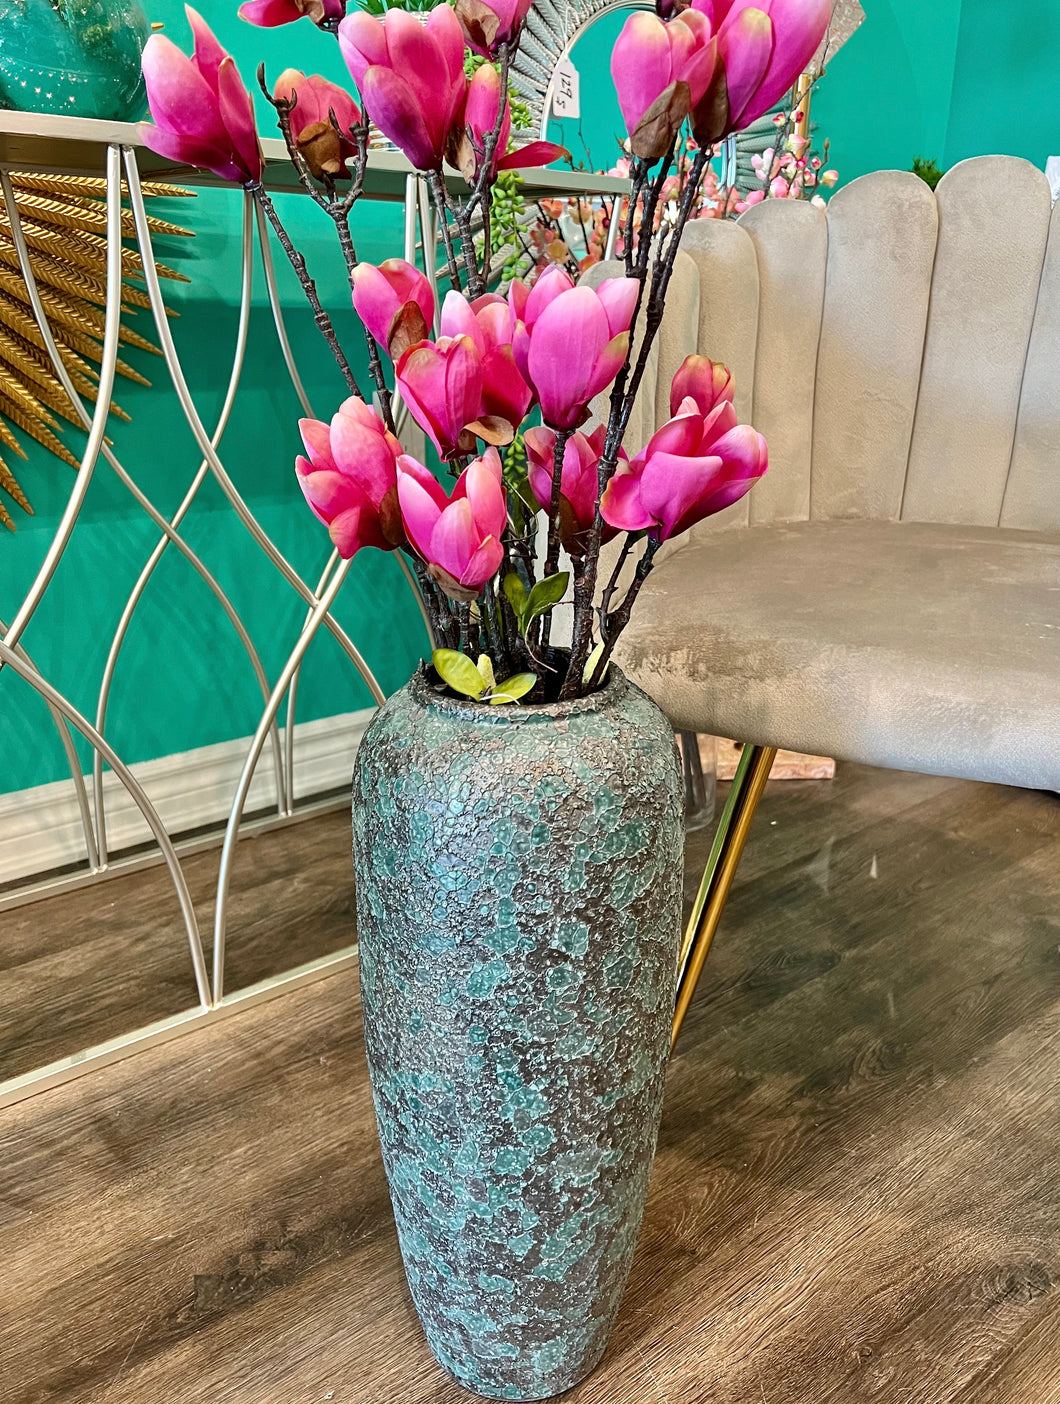 Floor Vase in Medium Size of High-quality Teal/Charcoal Textured Ceramic